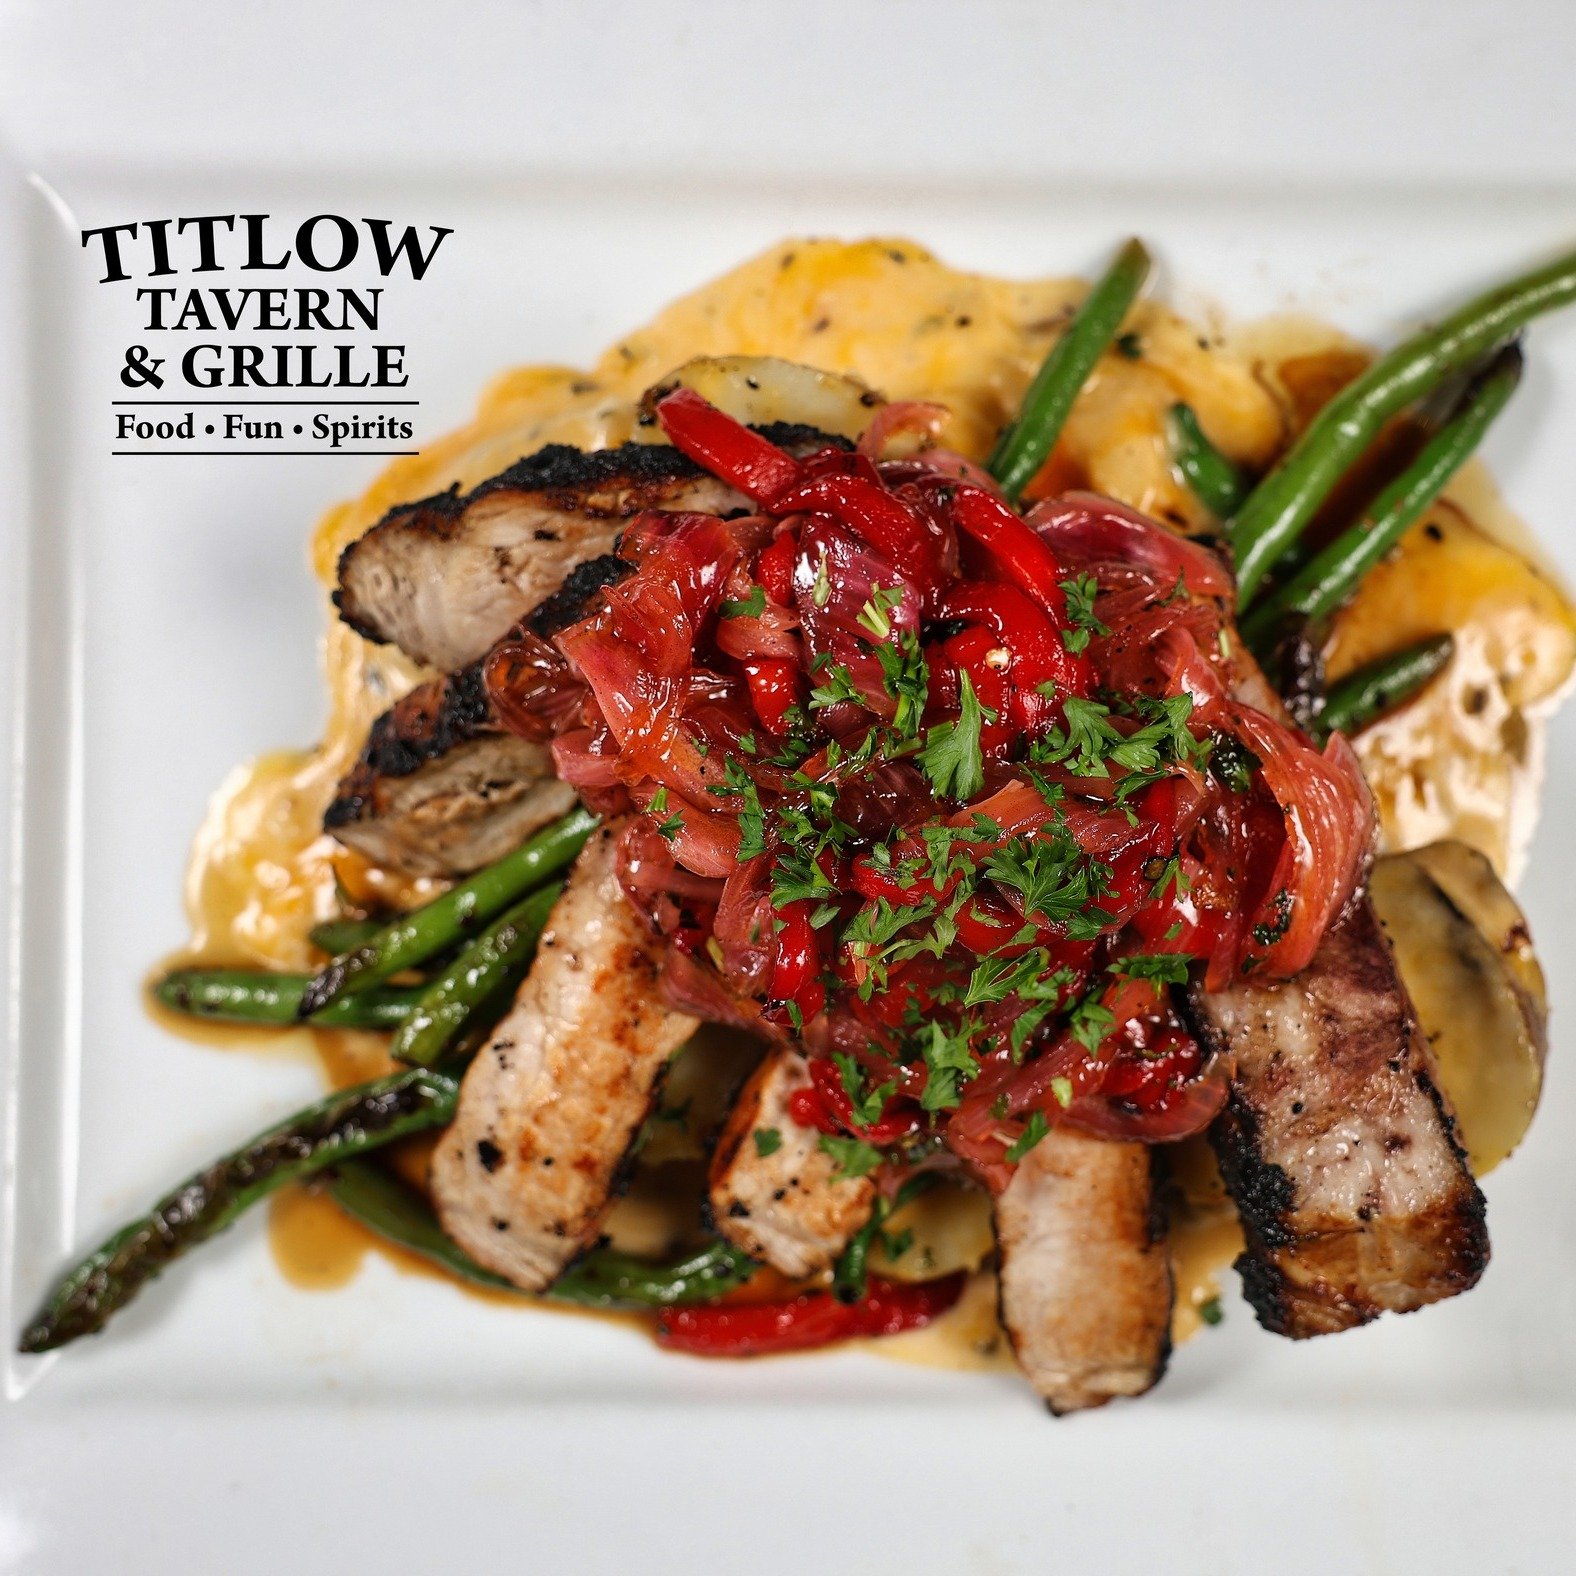 Need dinner reservations for the weekend? Give us a call: (724) 437-6749
.
.
.
.
.
#Uniontownpa #Uniontownphotography #uniontownfood #yum #delicious #foodie